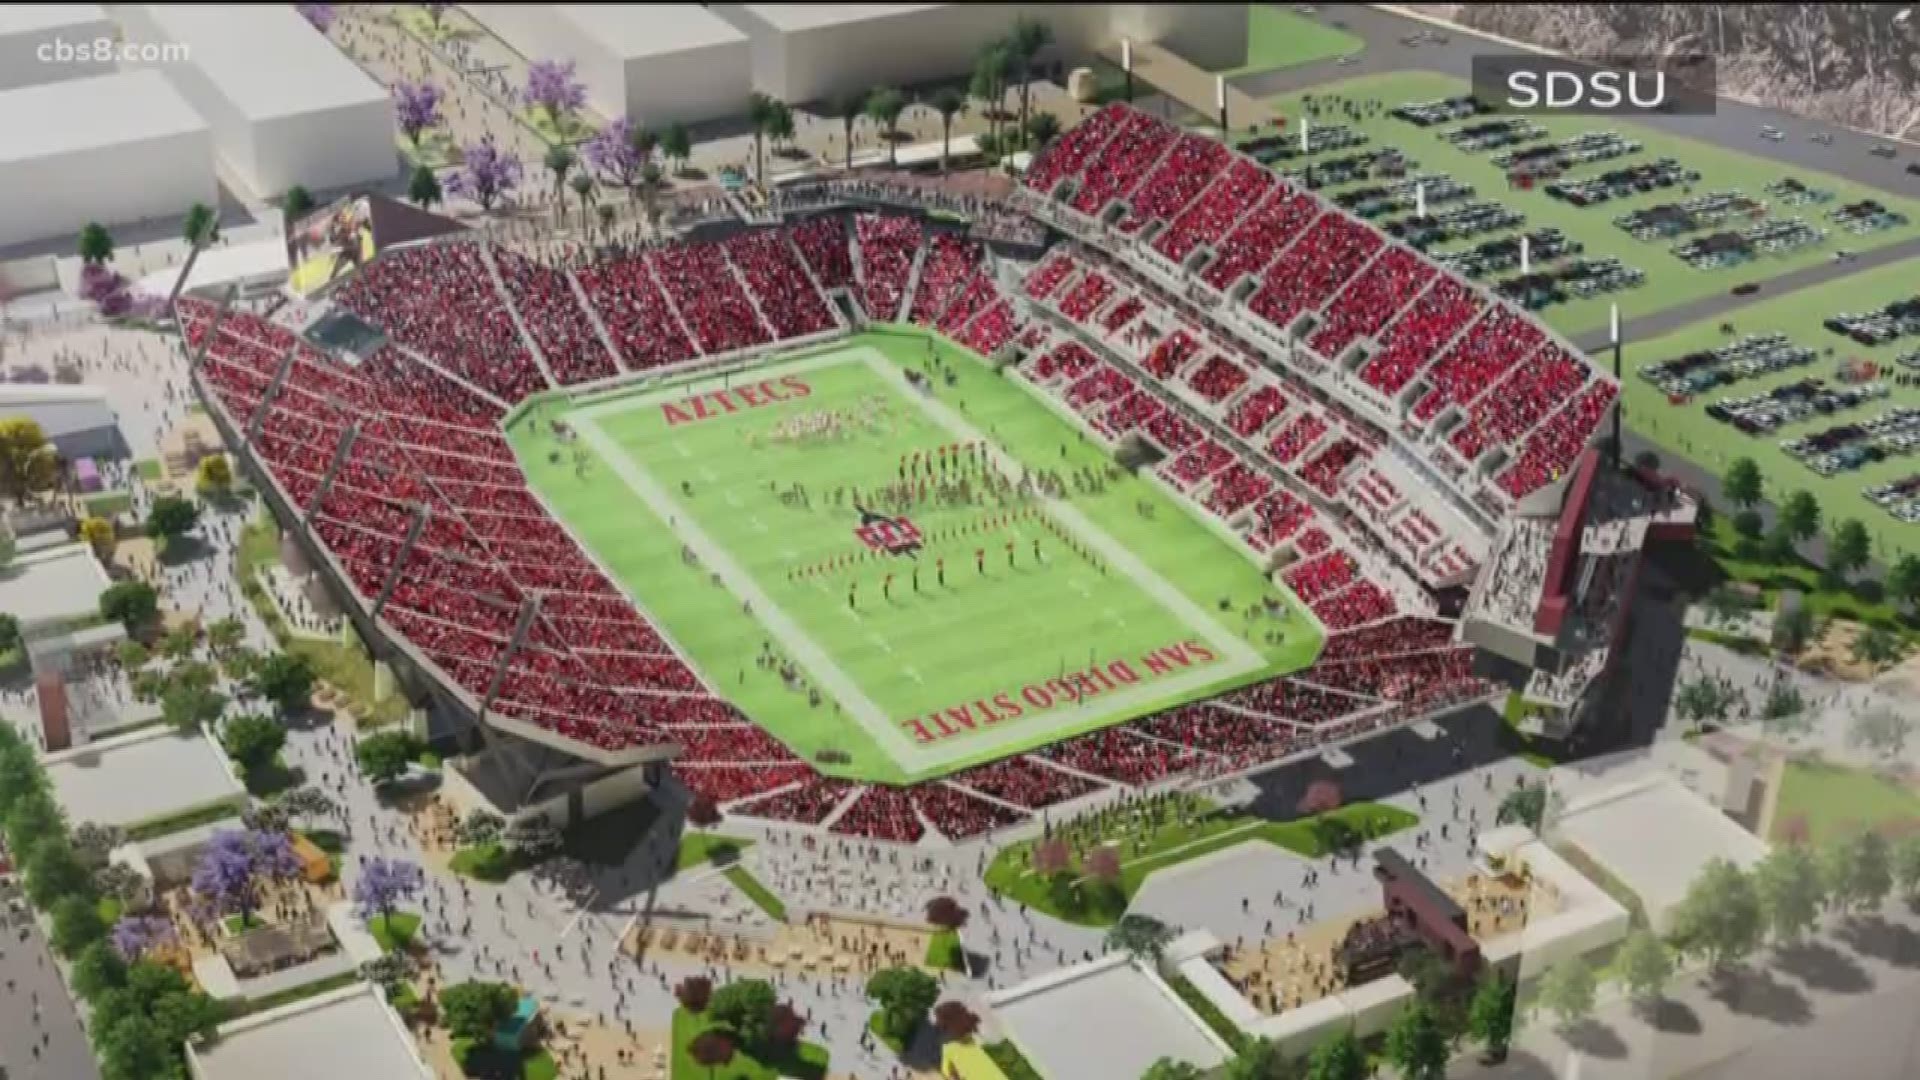 Thanks to a unanimous vote from San Diego City Council, this is what the future of SDSU athletics could look like.